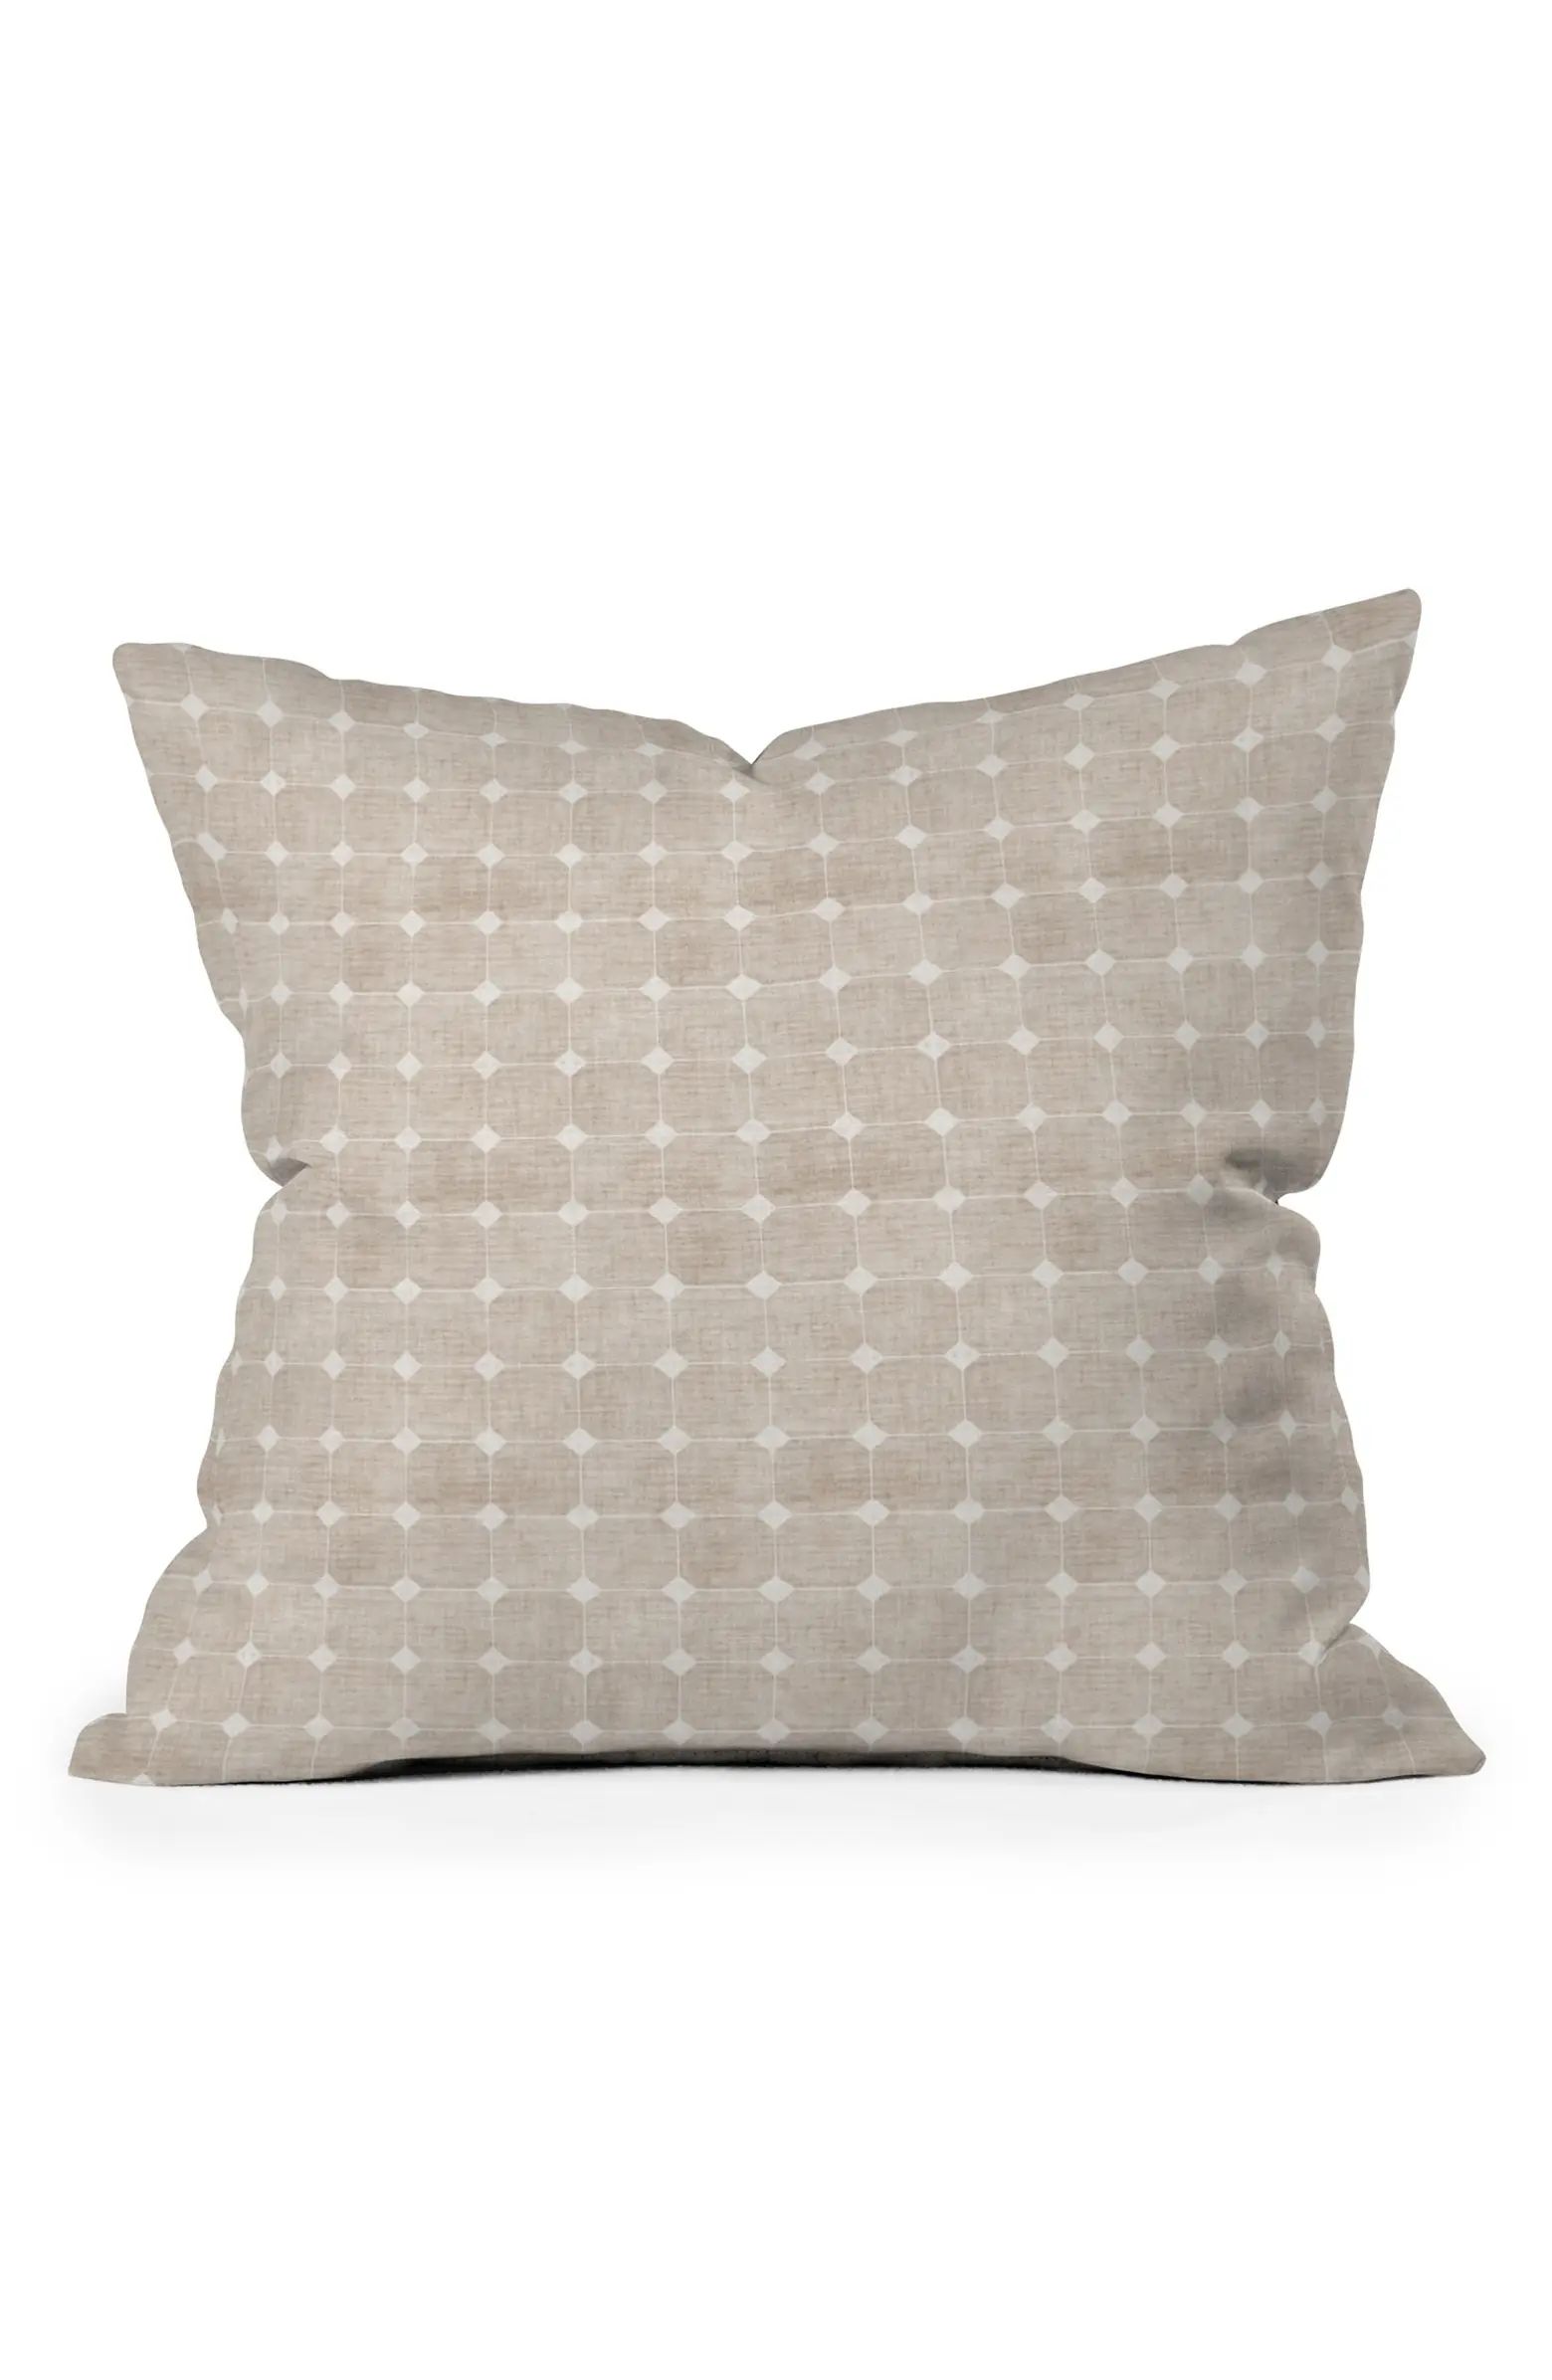 16-Inch Square Accent Pillow | Nordstrom